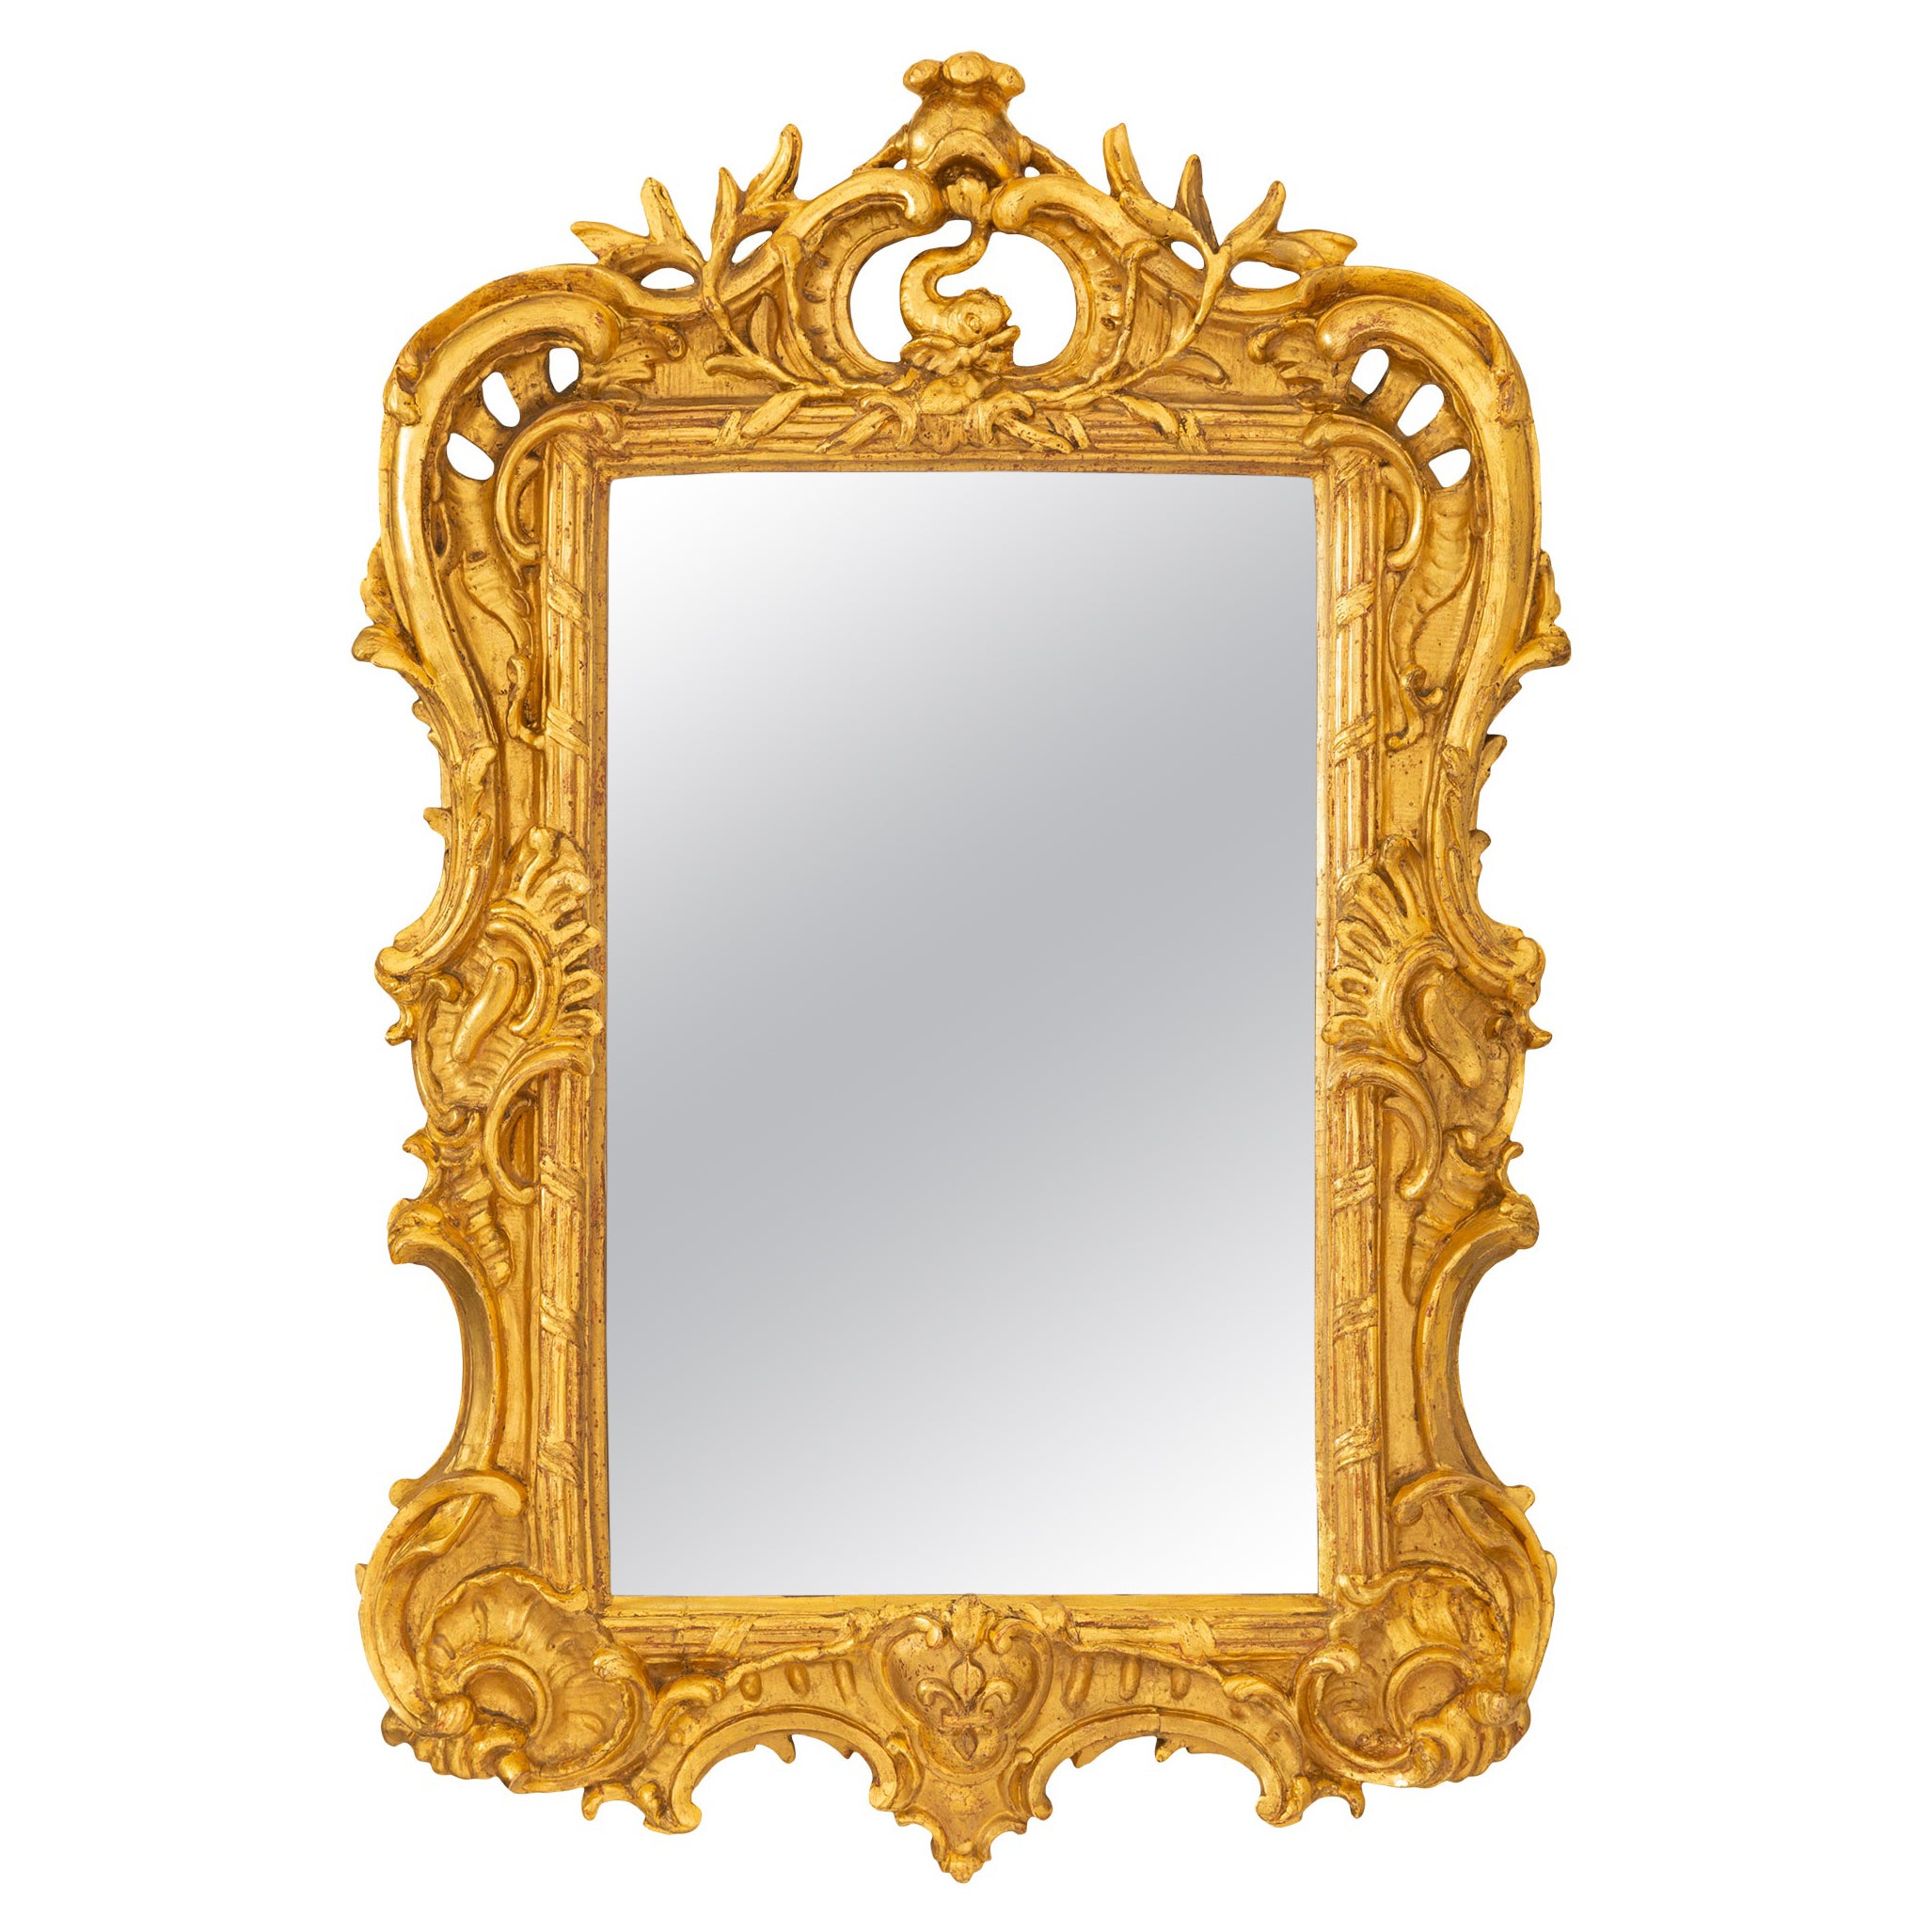 French Mid 18th Century Louis XV Period Giltwood Mirror For Sale